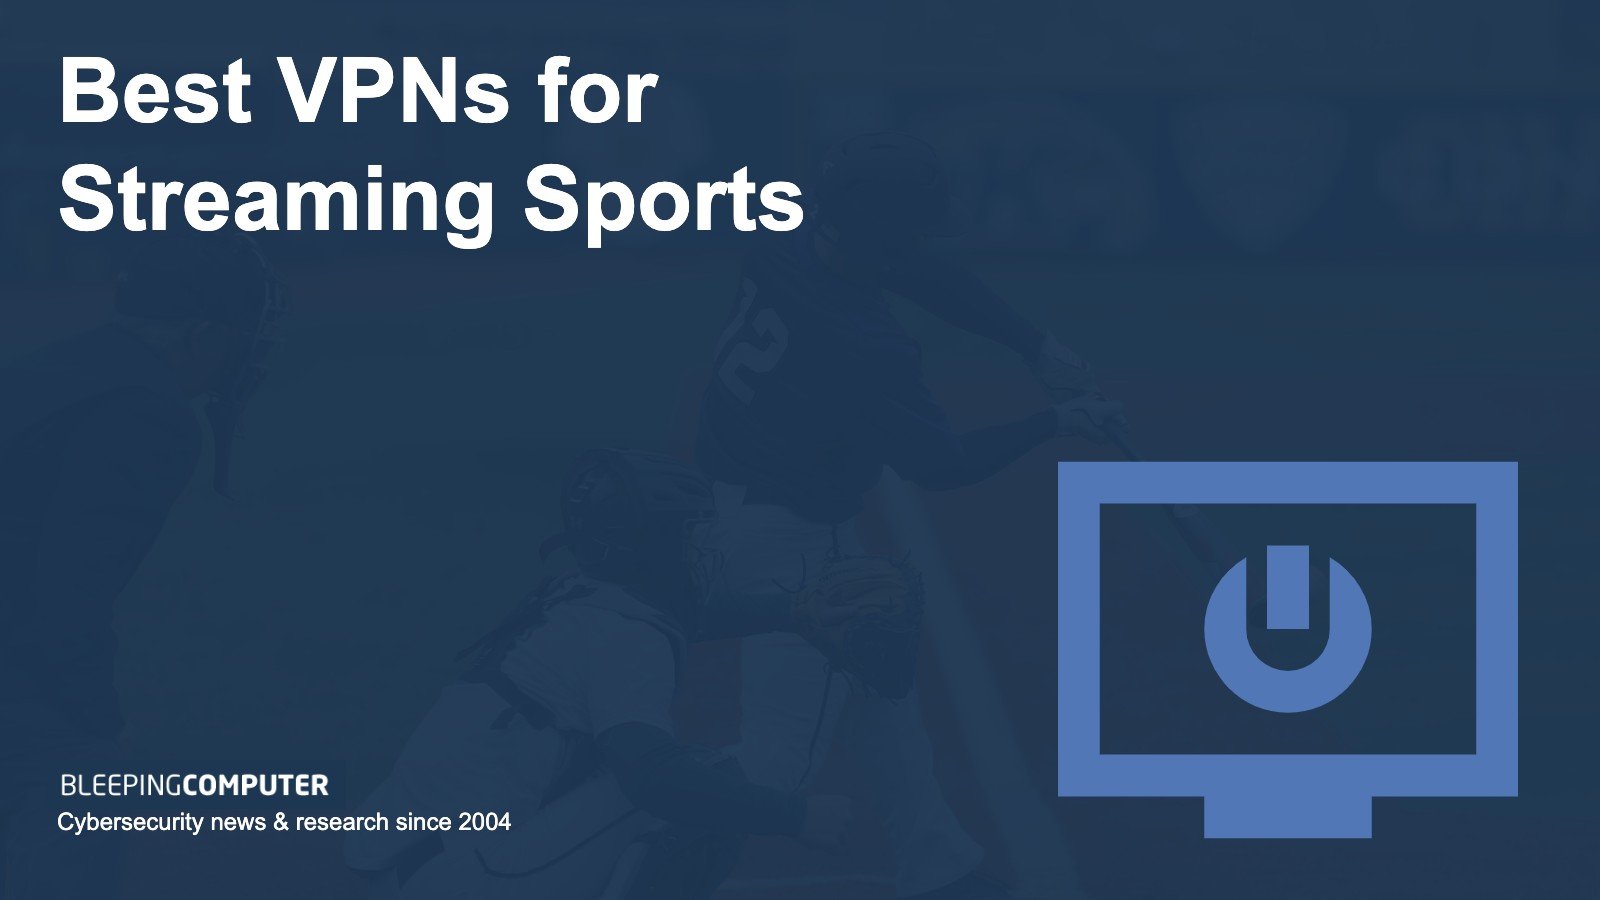 Best VPNs for Streaming Sports